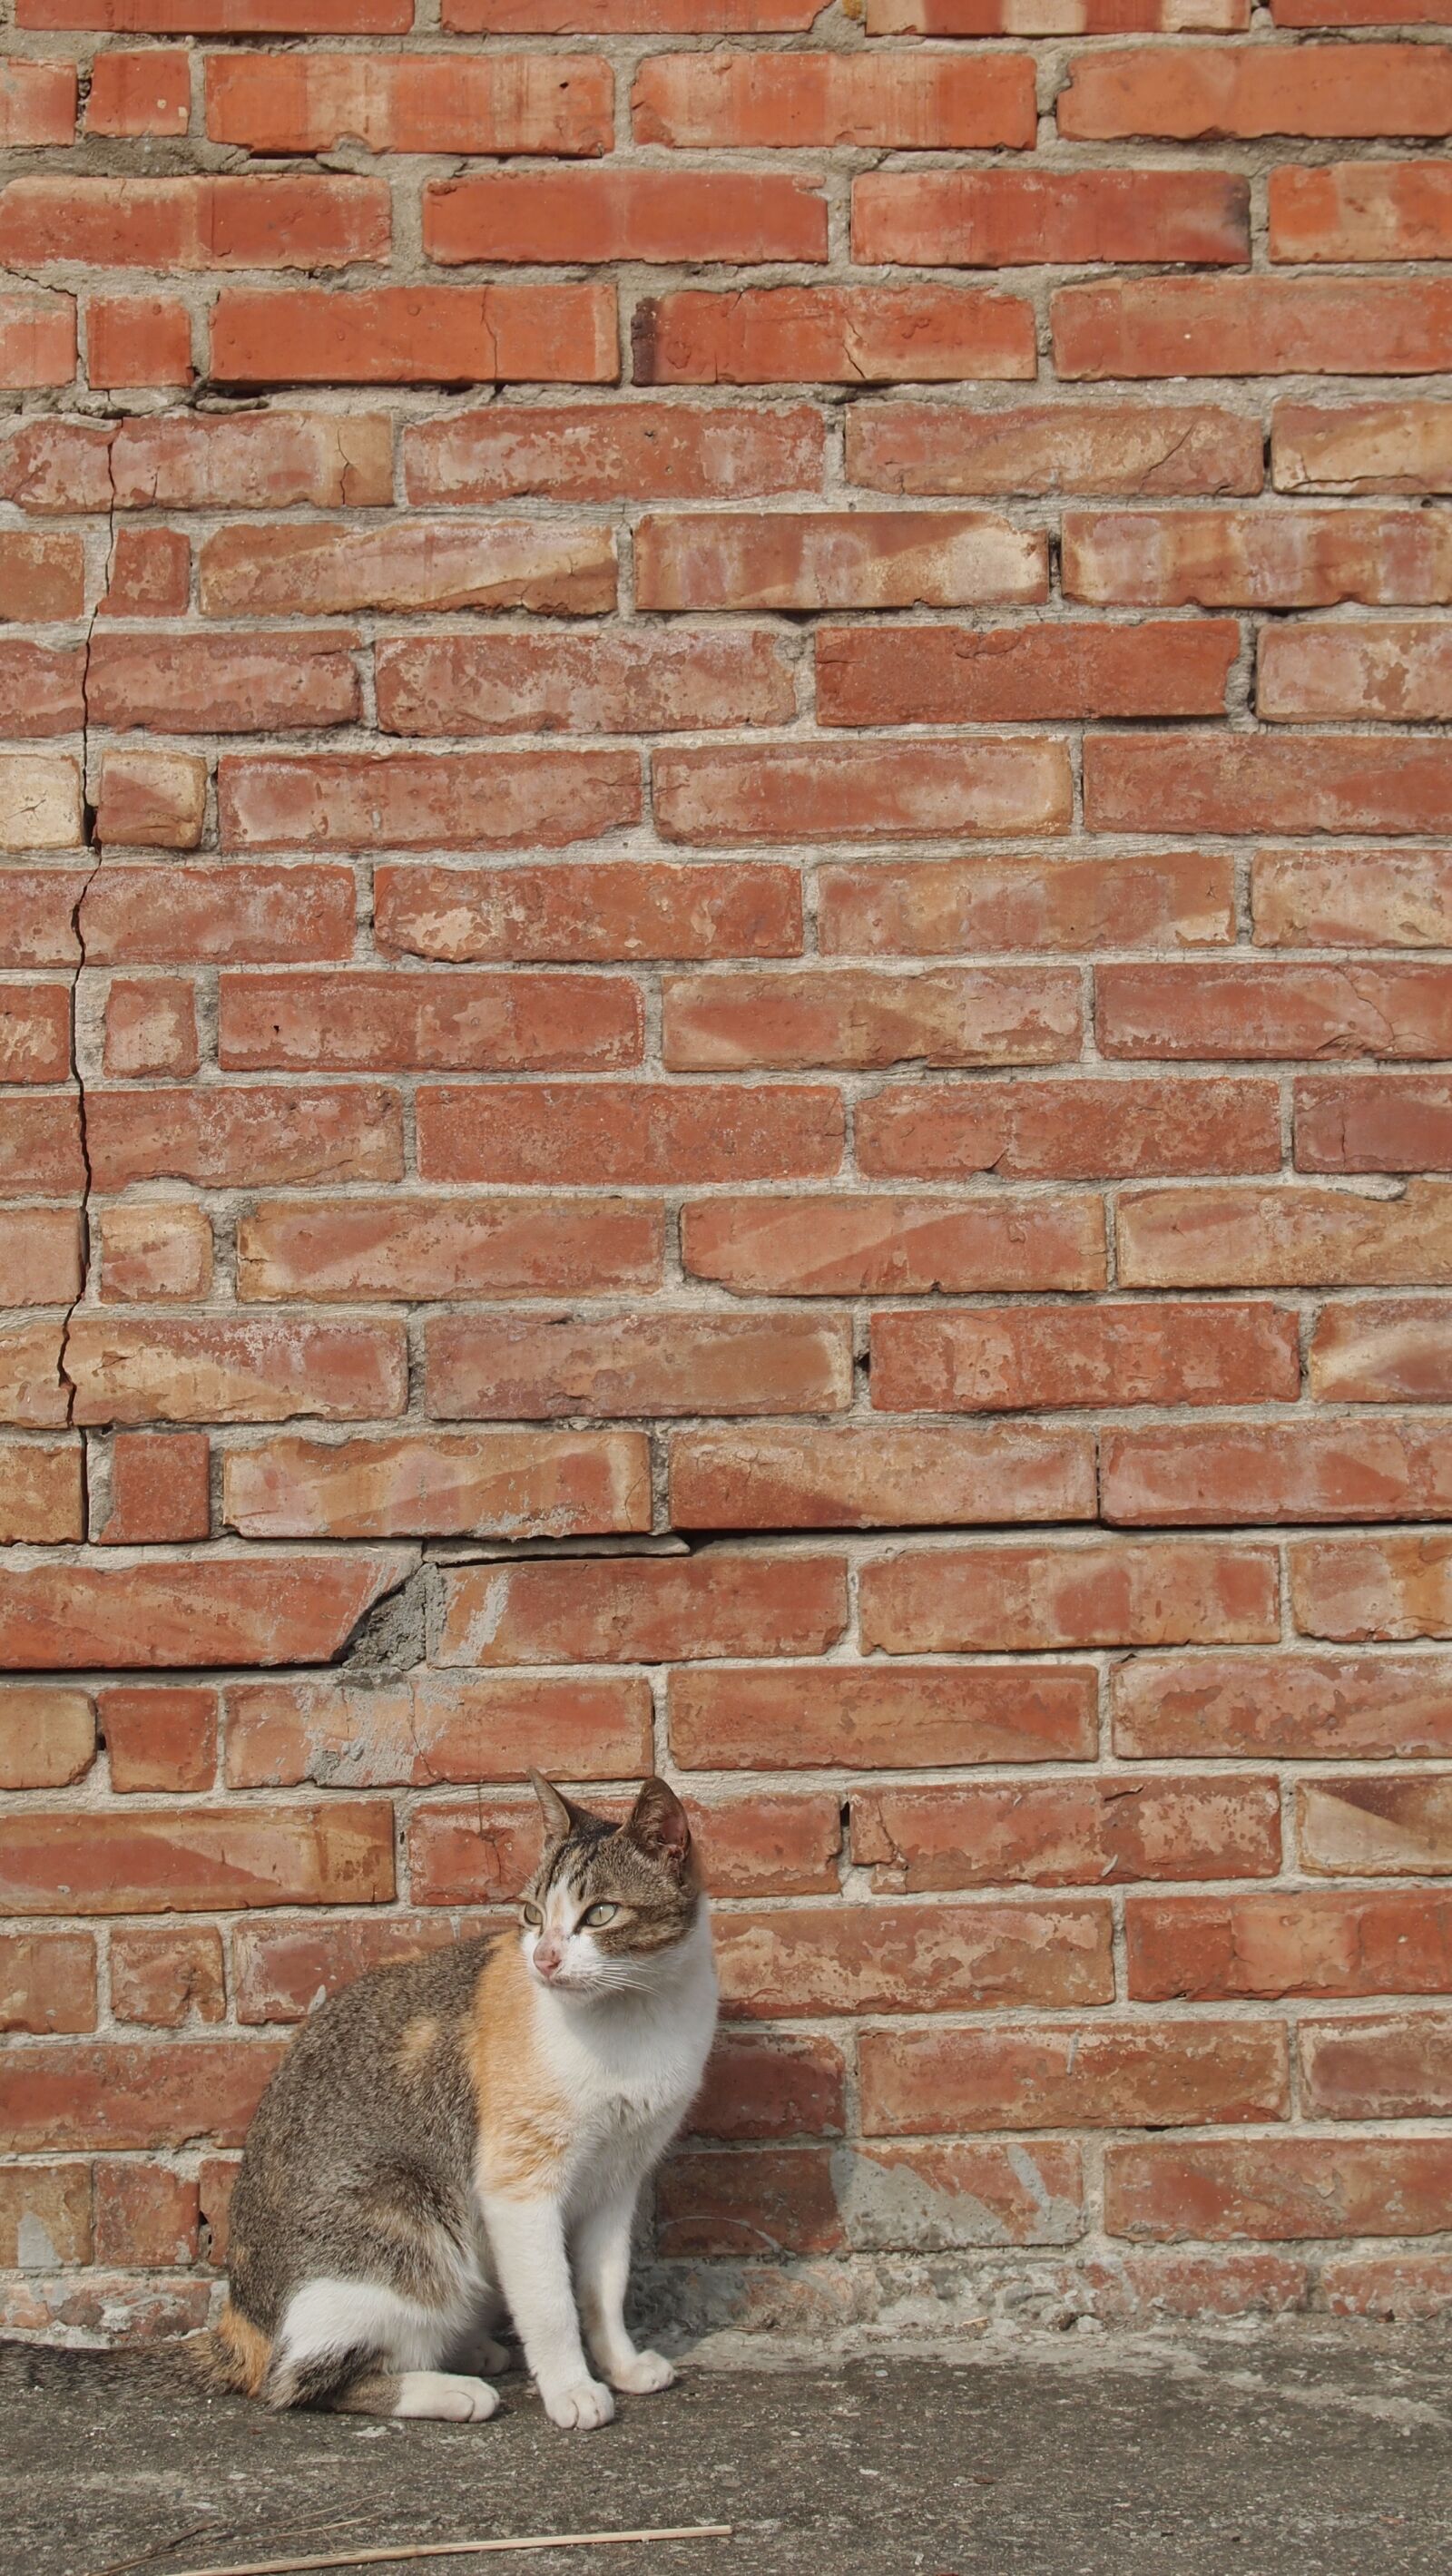 Olympus PEN E-PL2 sample photo. Cat, brick walls, afternoon photography